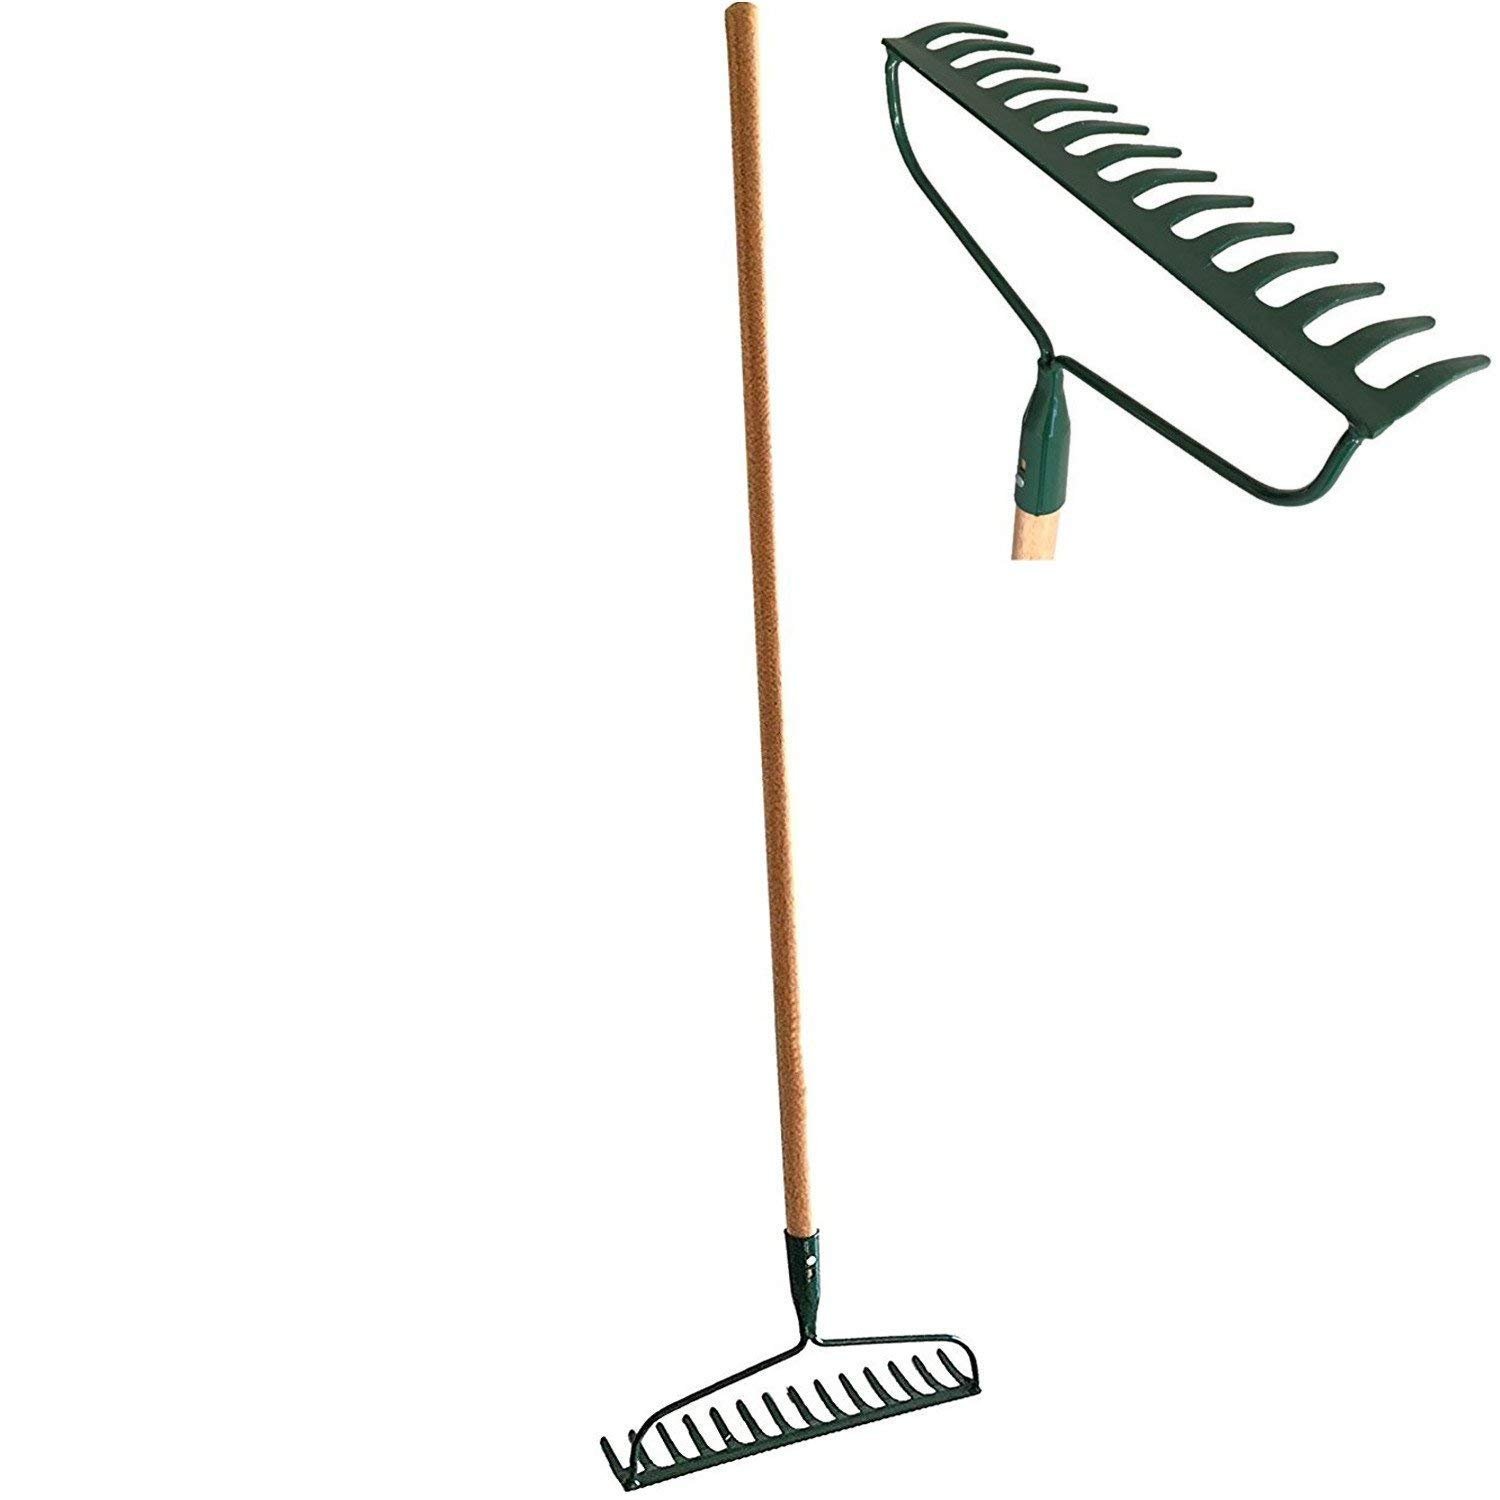 Set of 2 Garden Bow Rake Wood Handle Landscape Cultivator Gardening Tool Leveling Mulch peat Moss and Loose Heavy soils Long Handle Sweep Fall Leaves No Bending Easy Grip Metal Rake - image 1 of 2